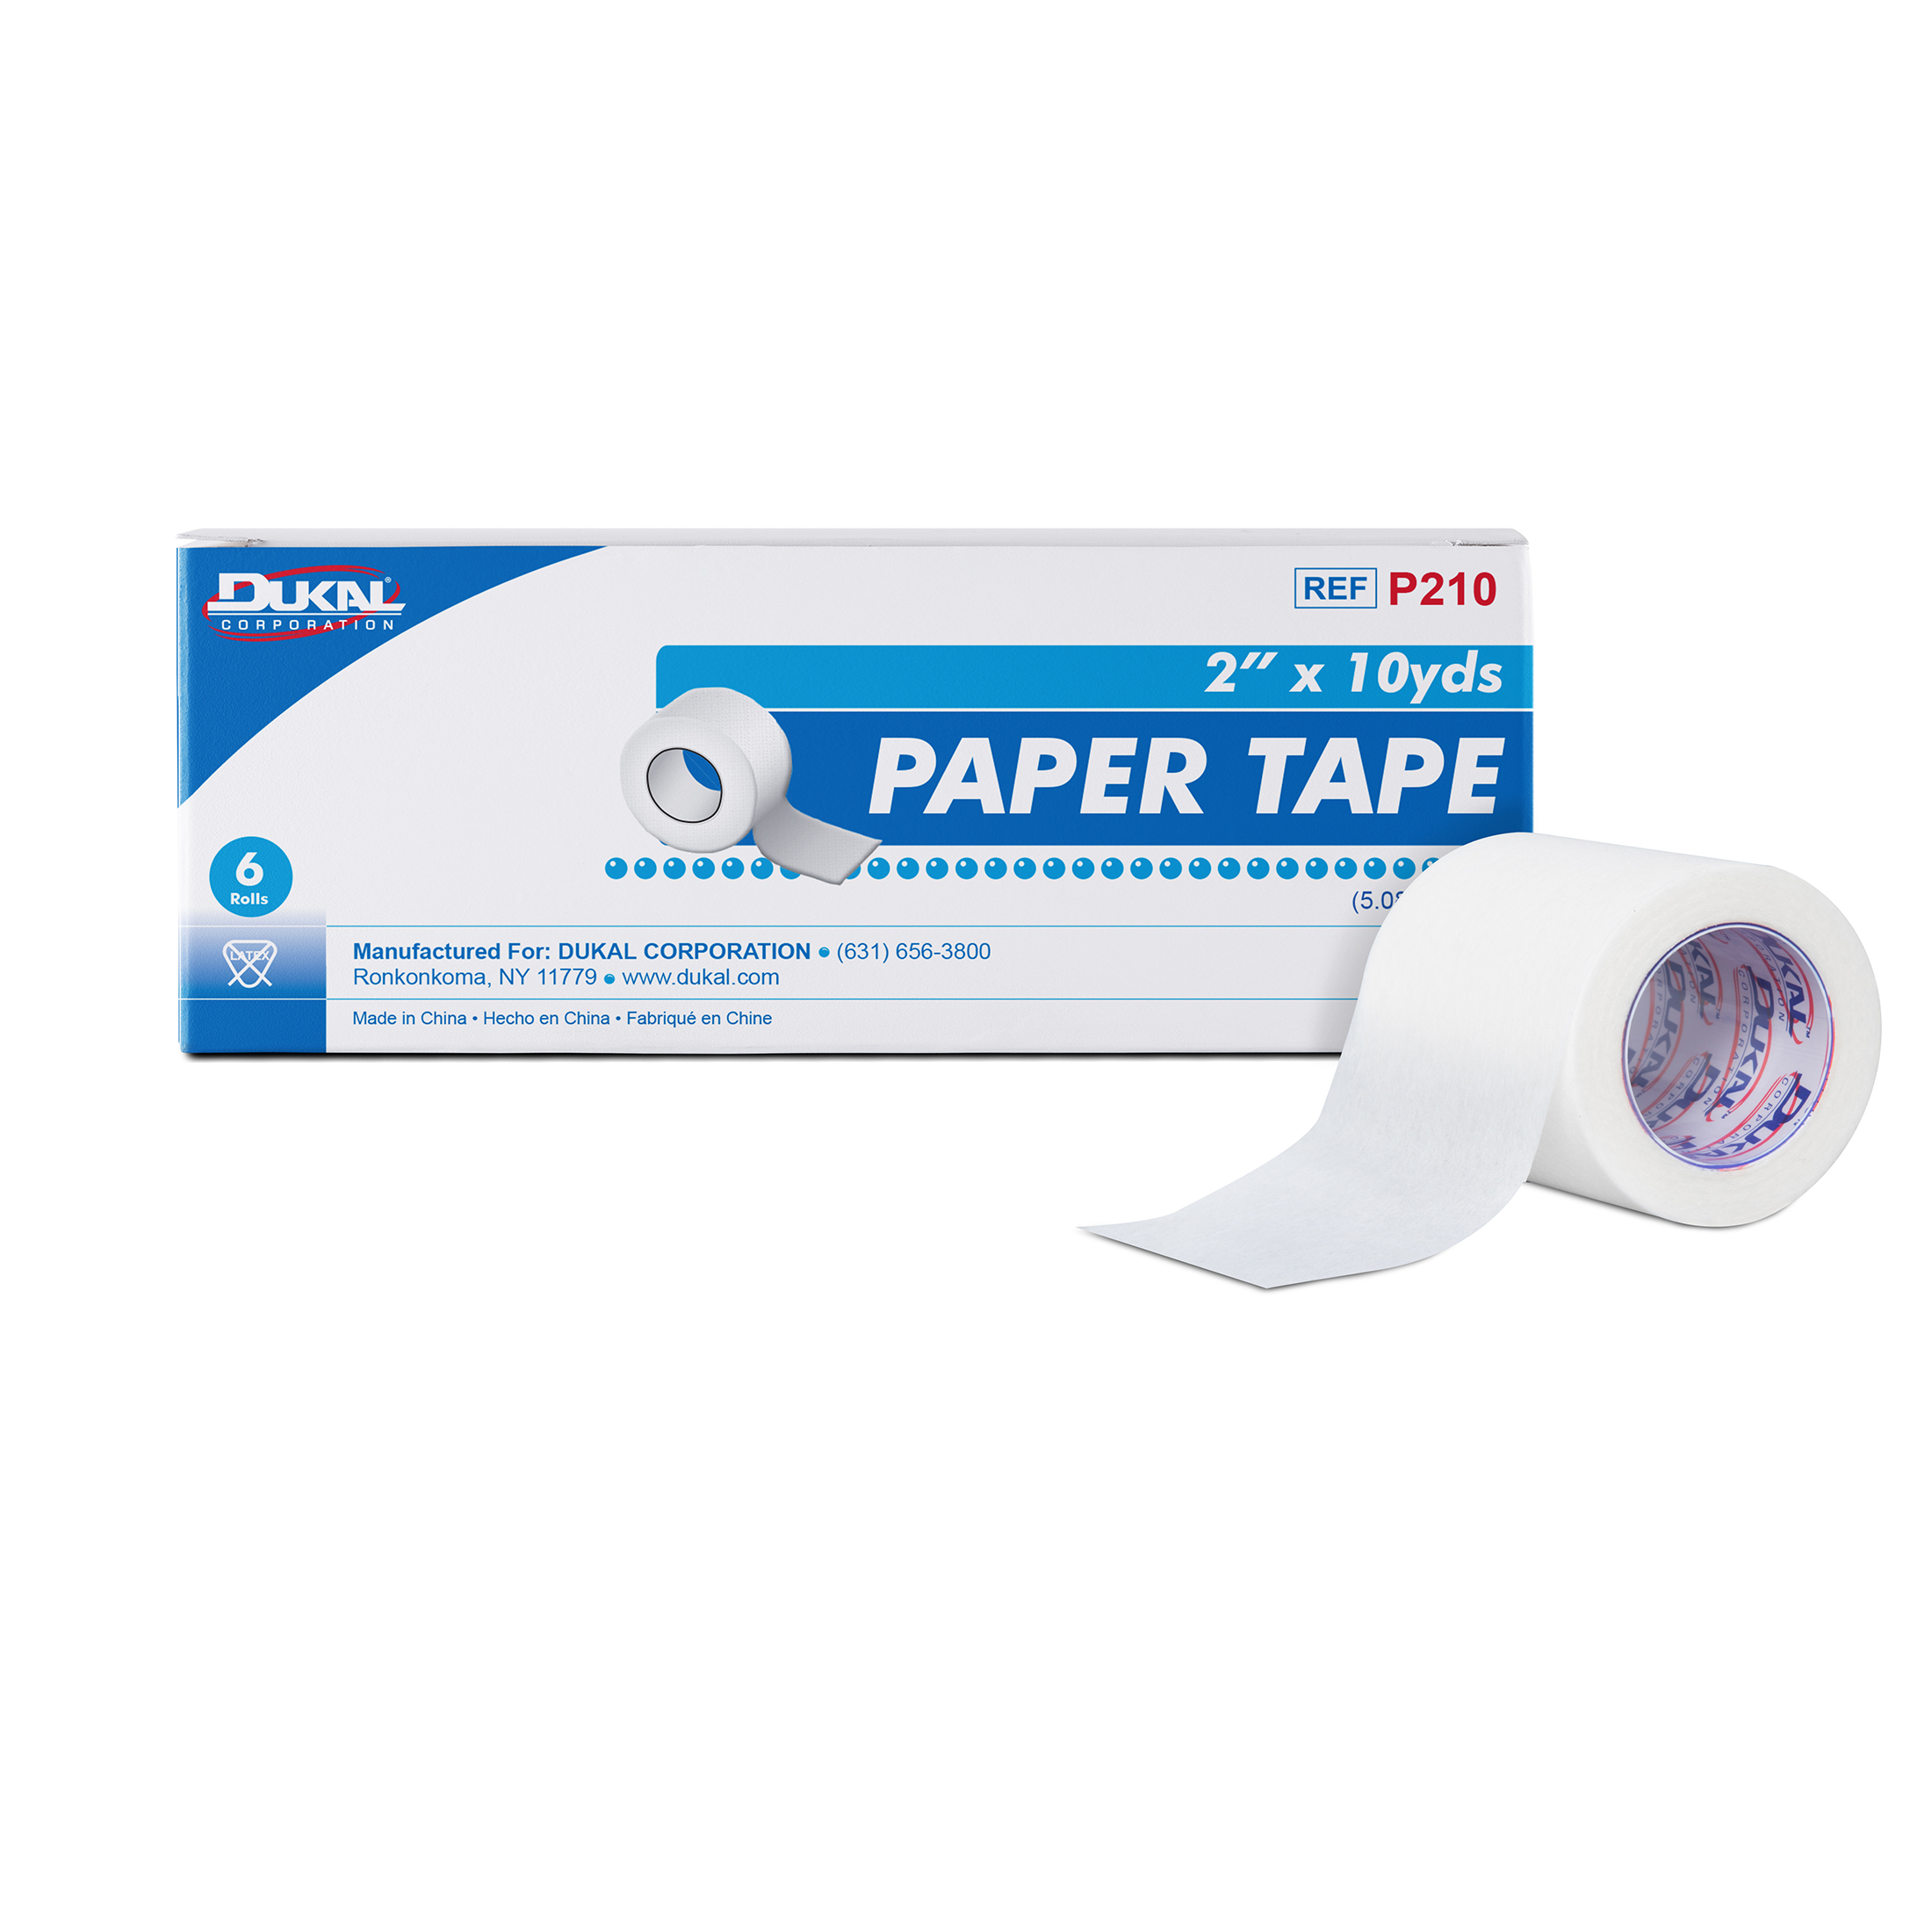 2" Surgical Paper Tape Products, Supplies and Equipment